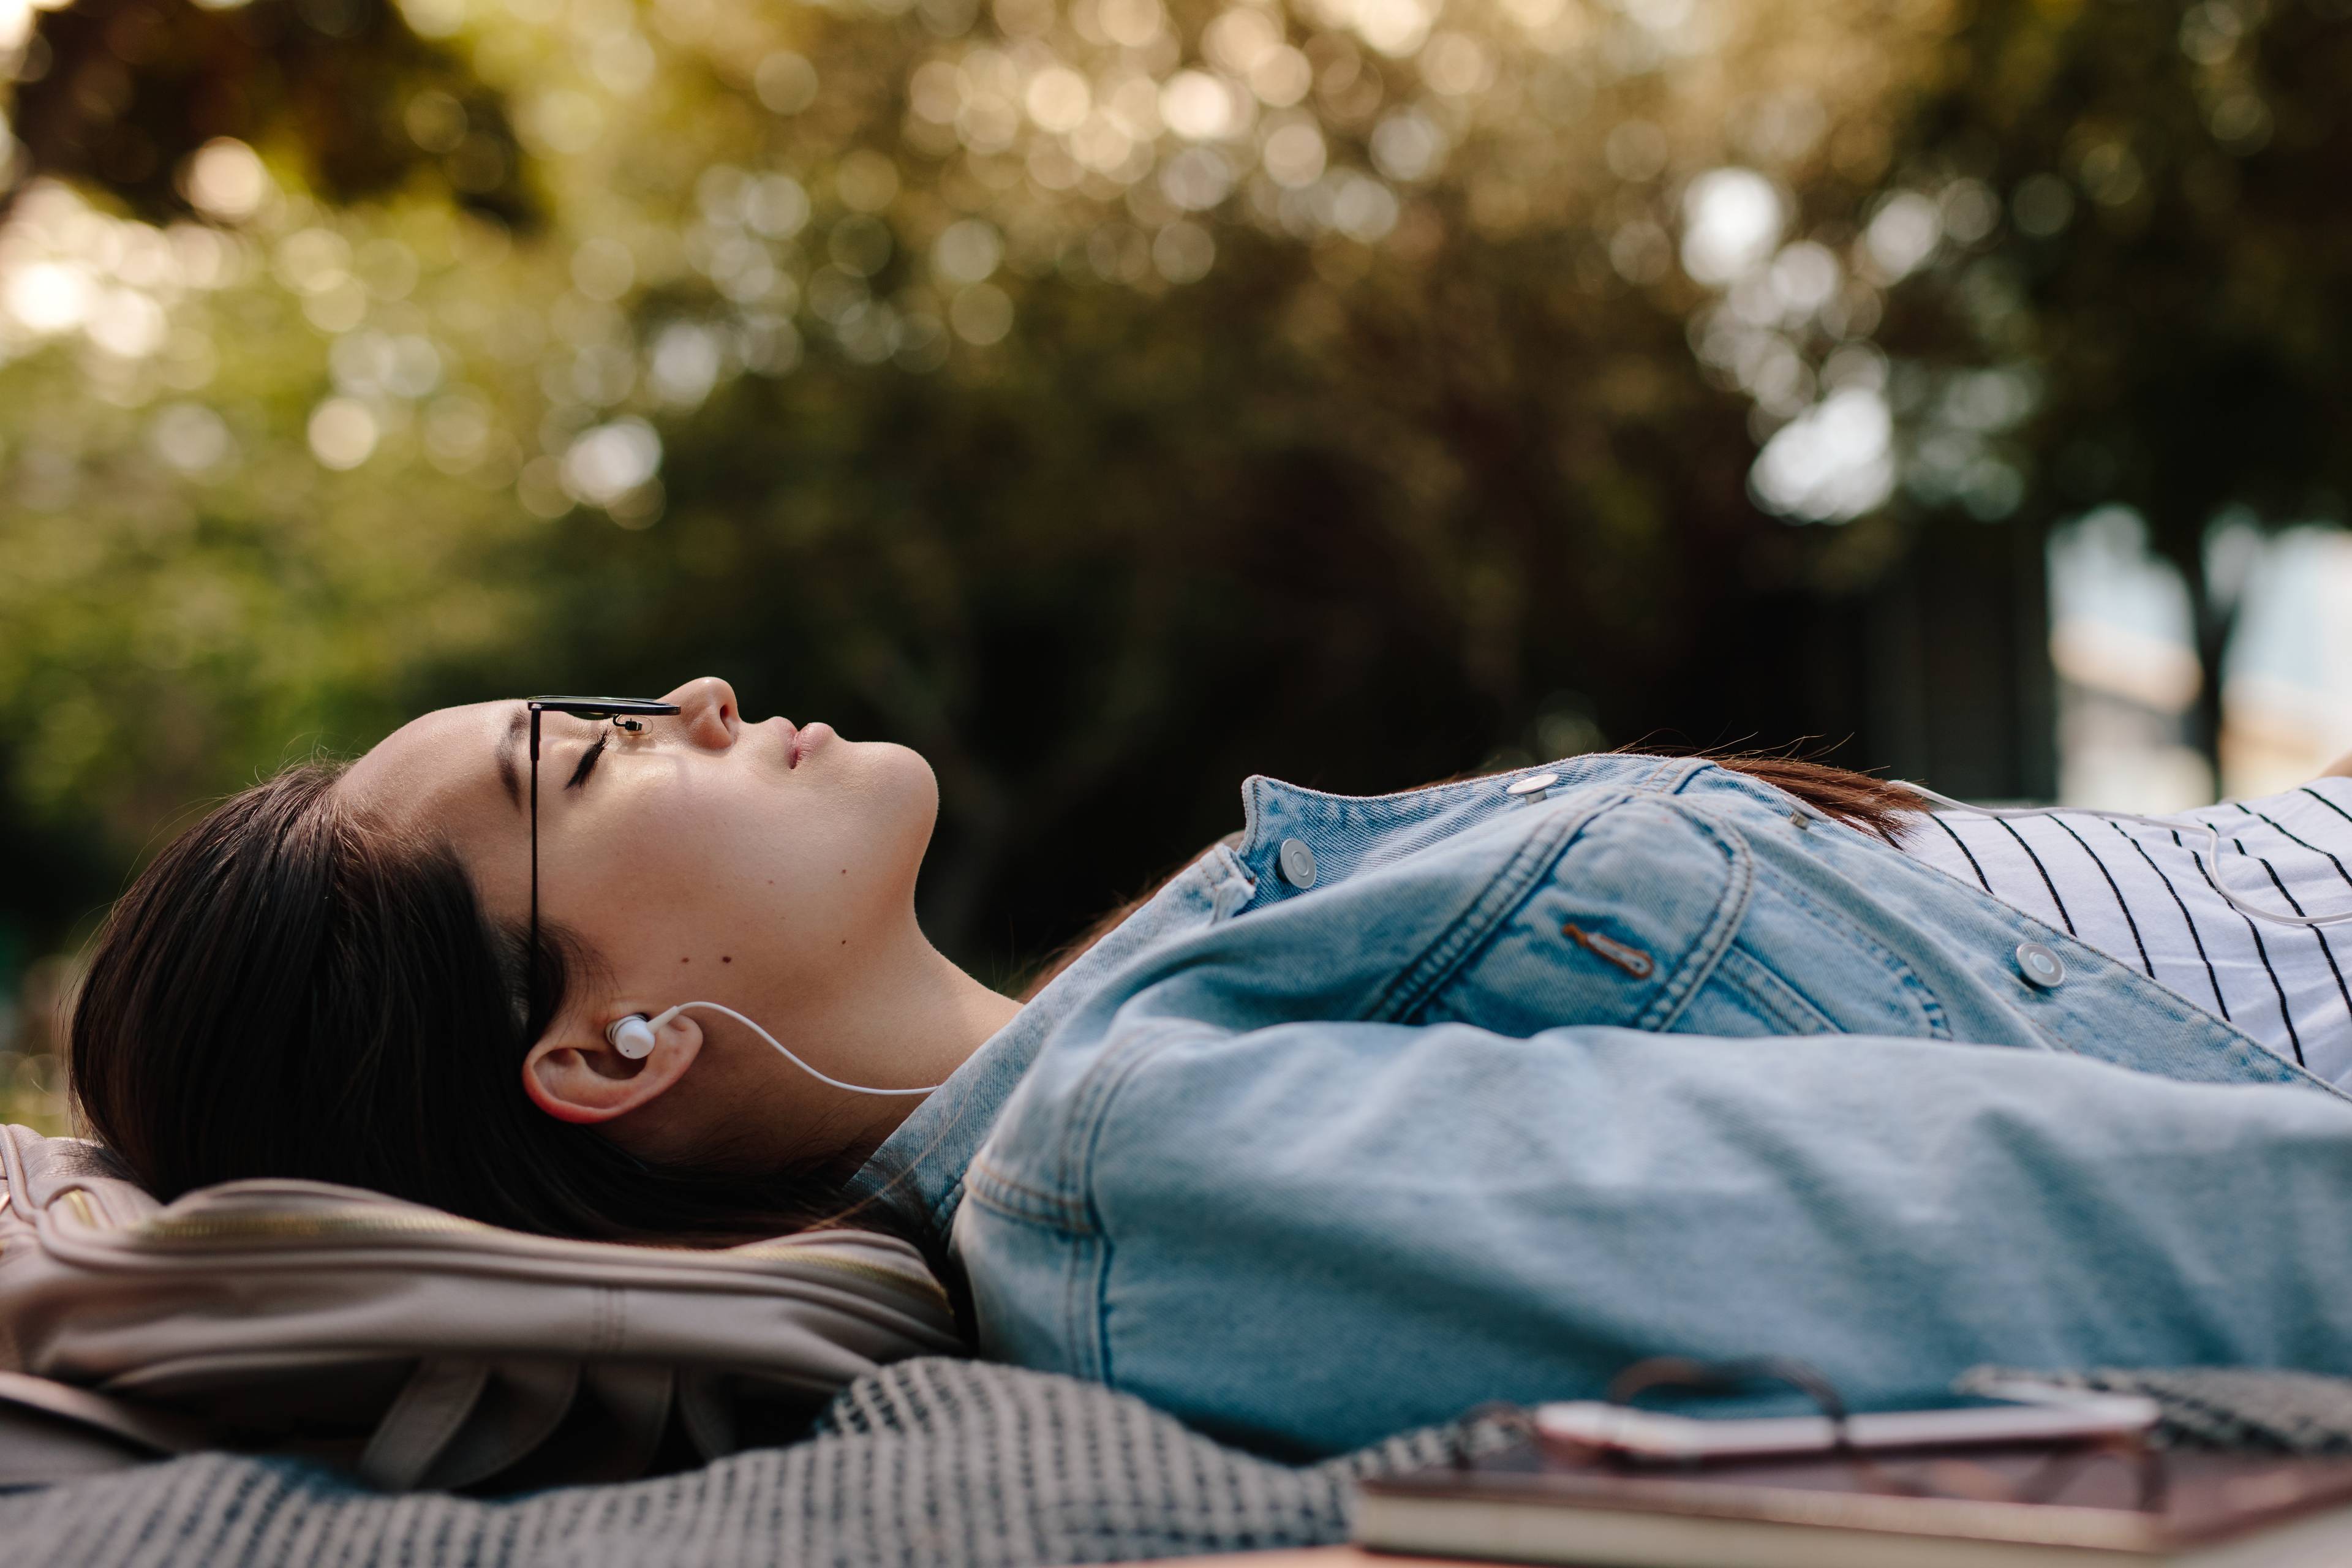 A young, Asian woman lies down listening contentedly to audio entertainment with earbuds